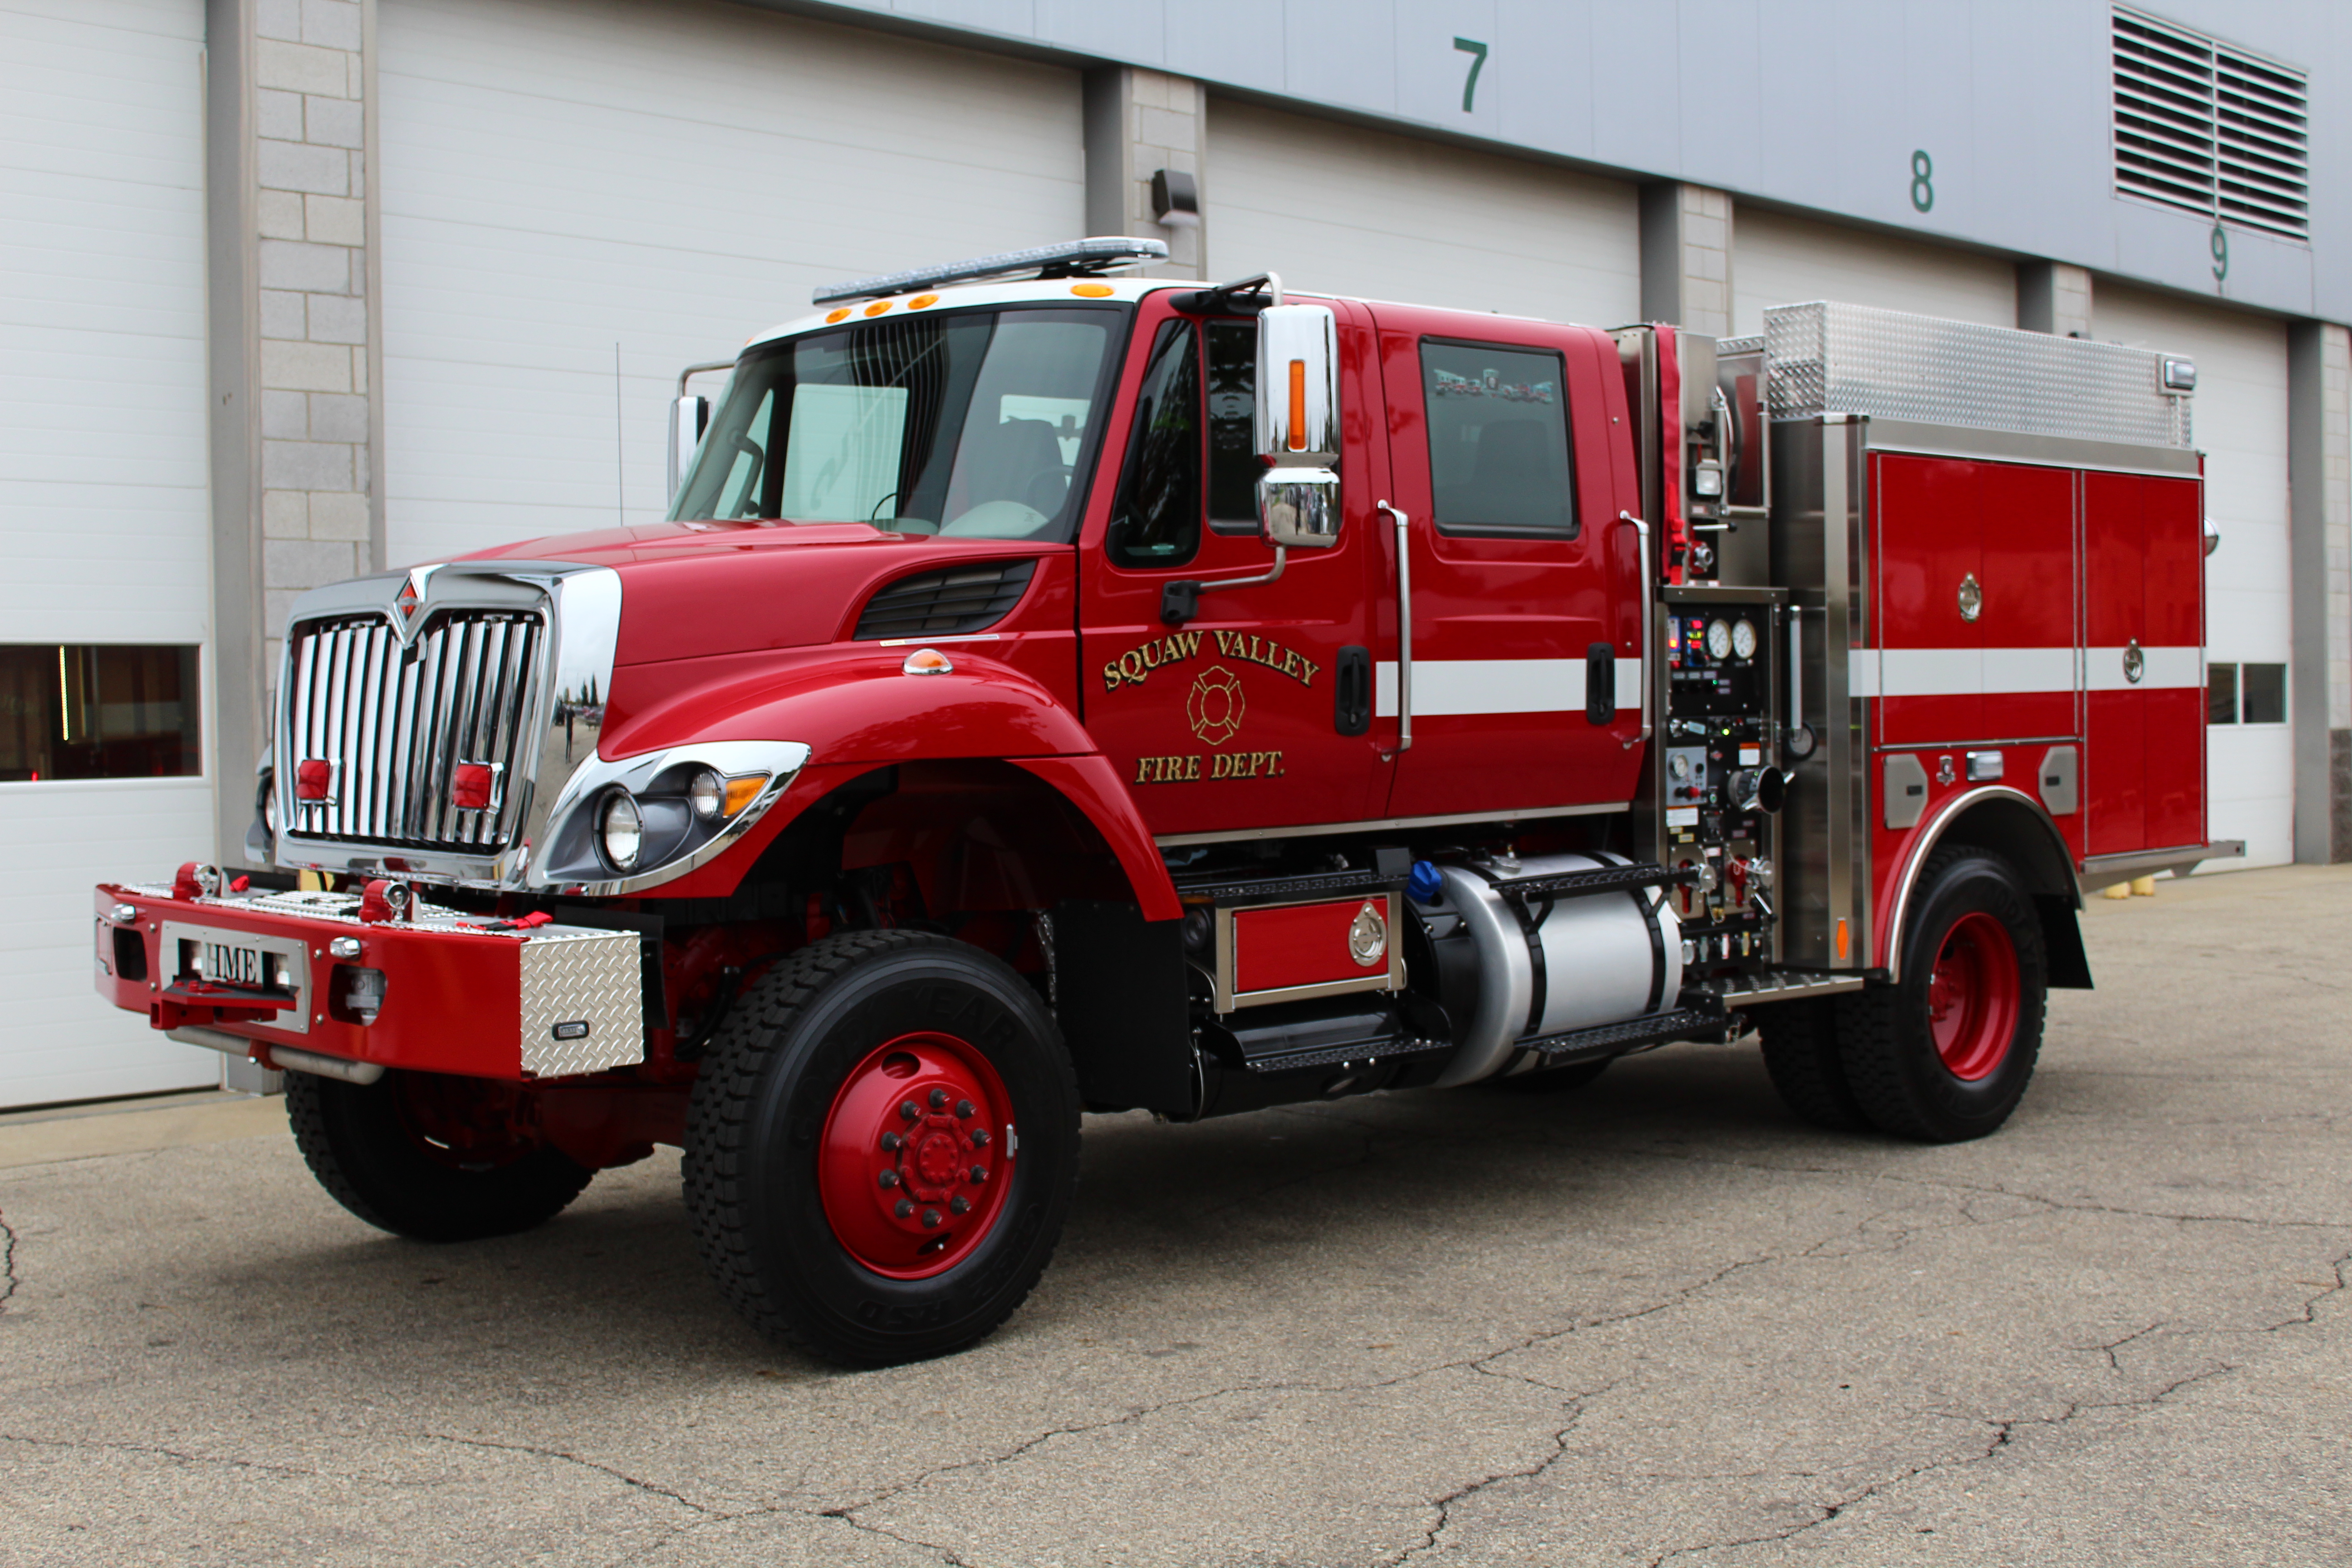 Squaw Valley Fire Department, CA – #23013